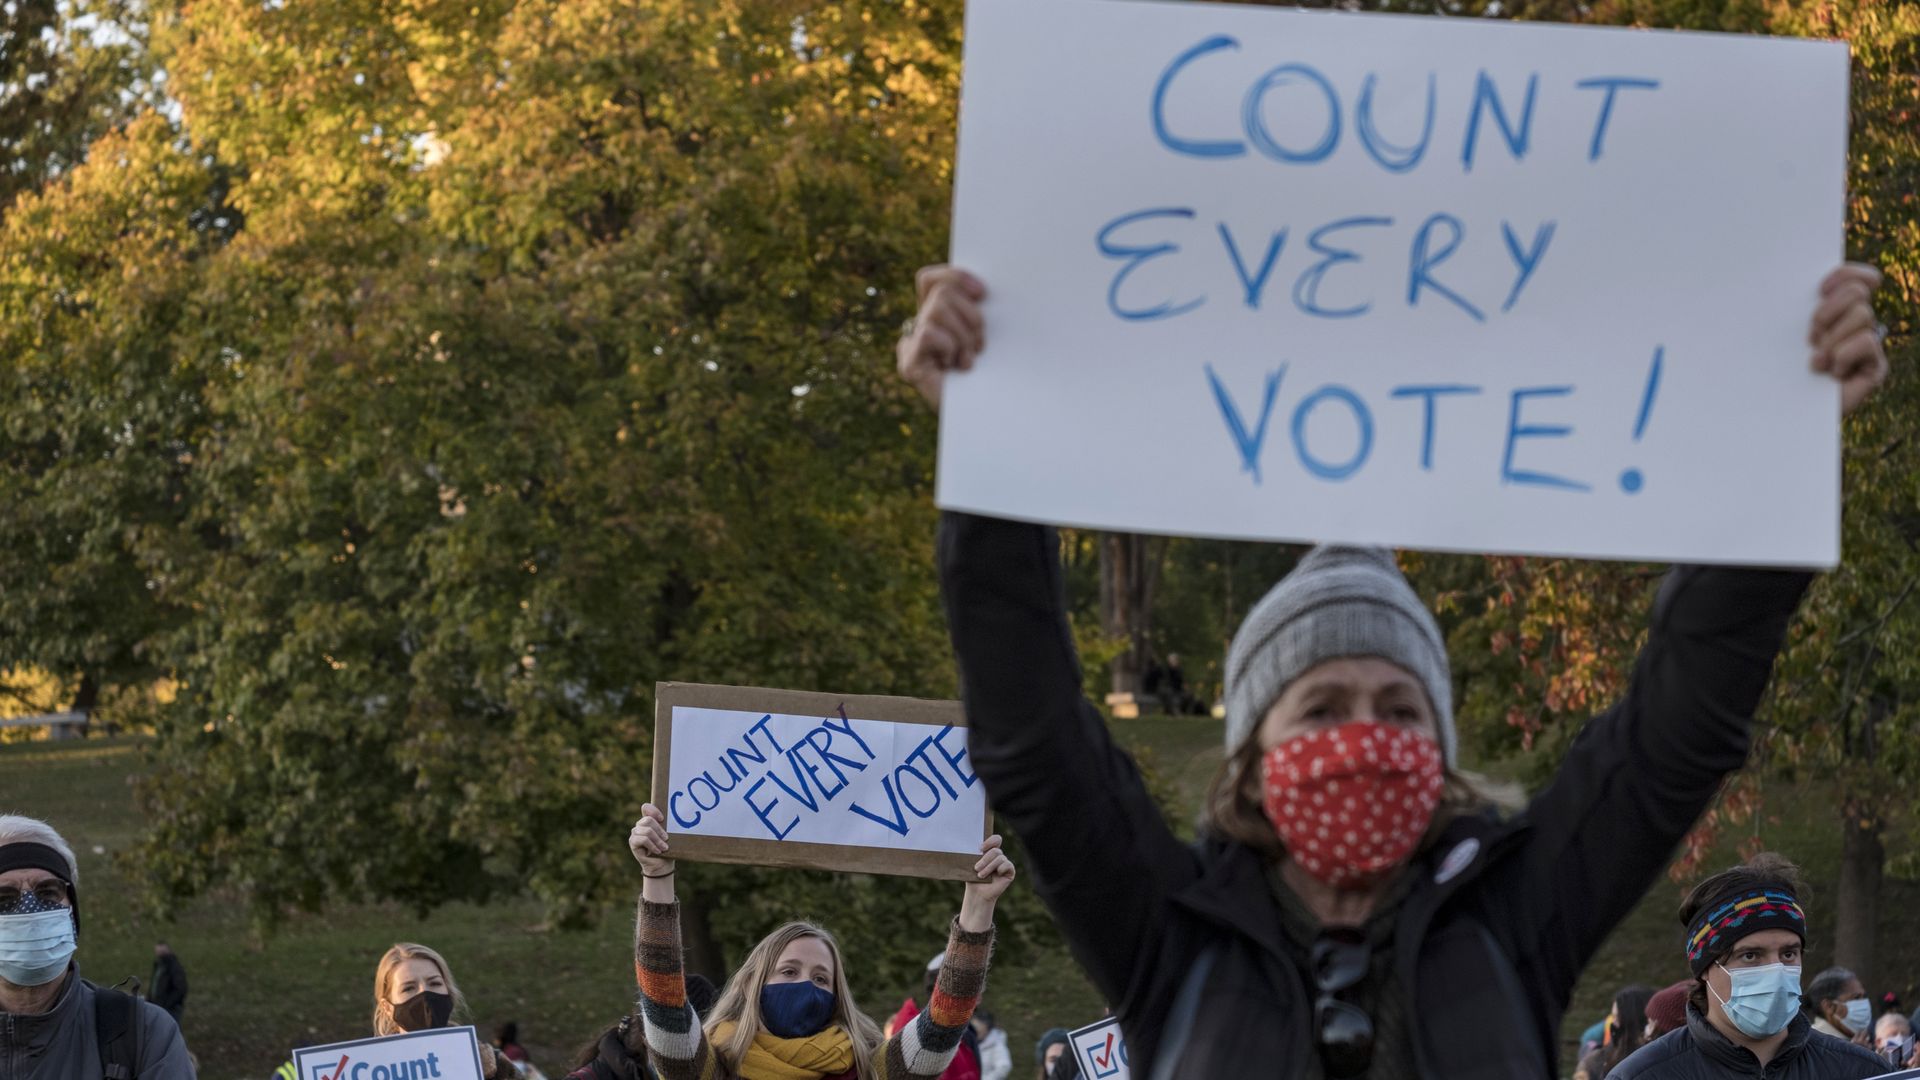 People hold signs that say "count every vote," in Boston.